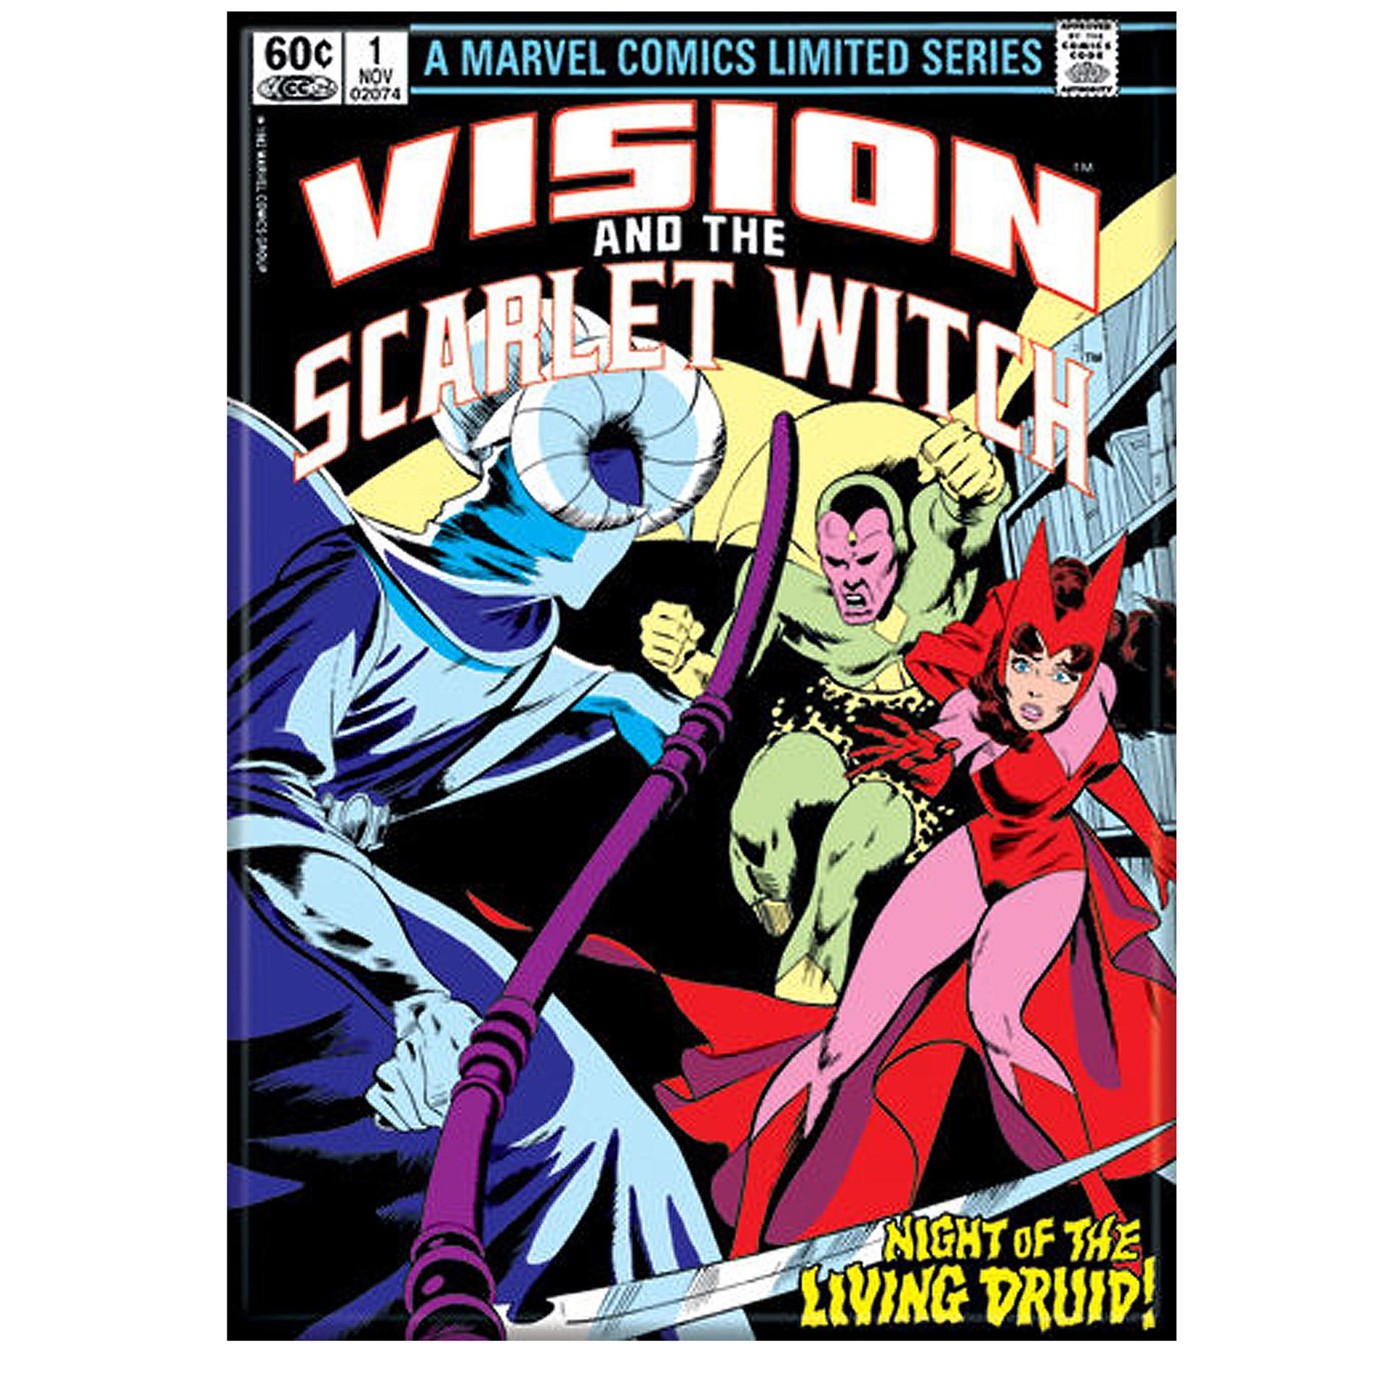 Vision and the Scarlet Witch #1 Cover Magnet